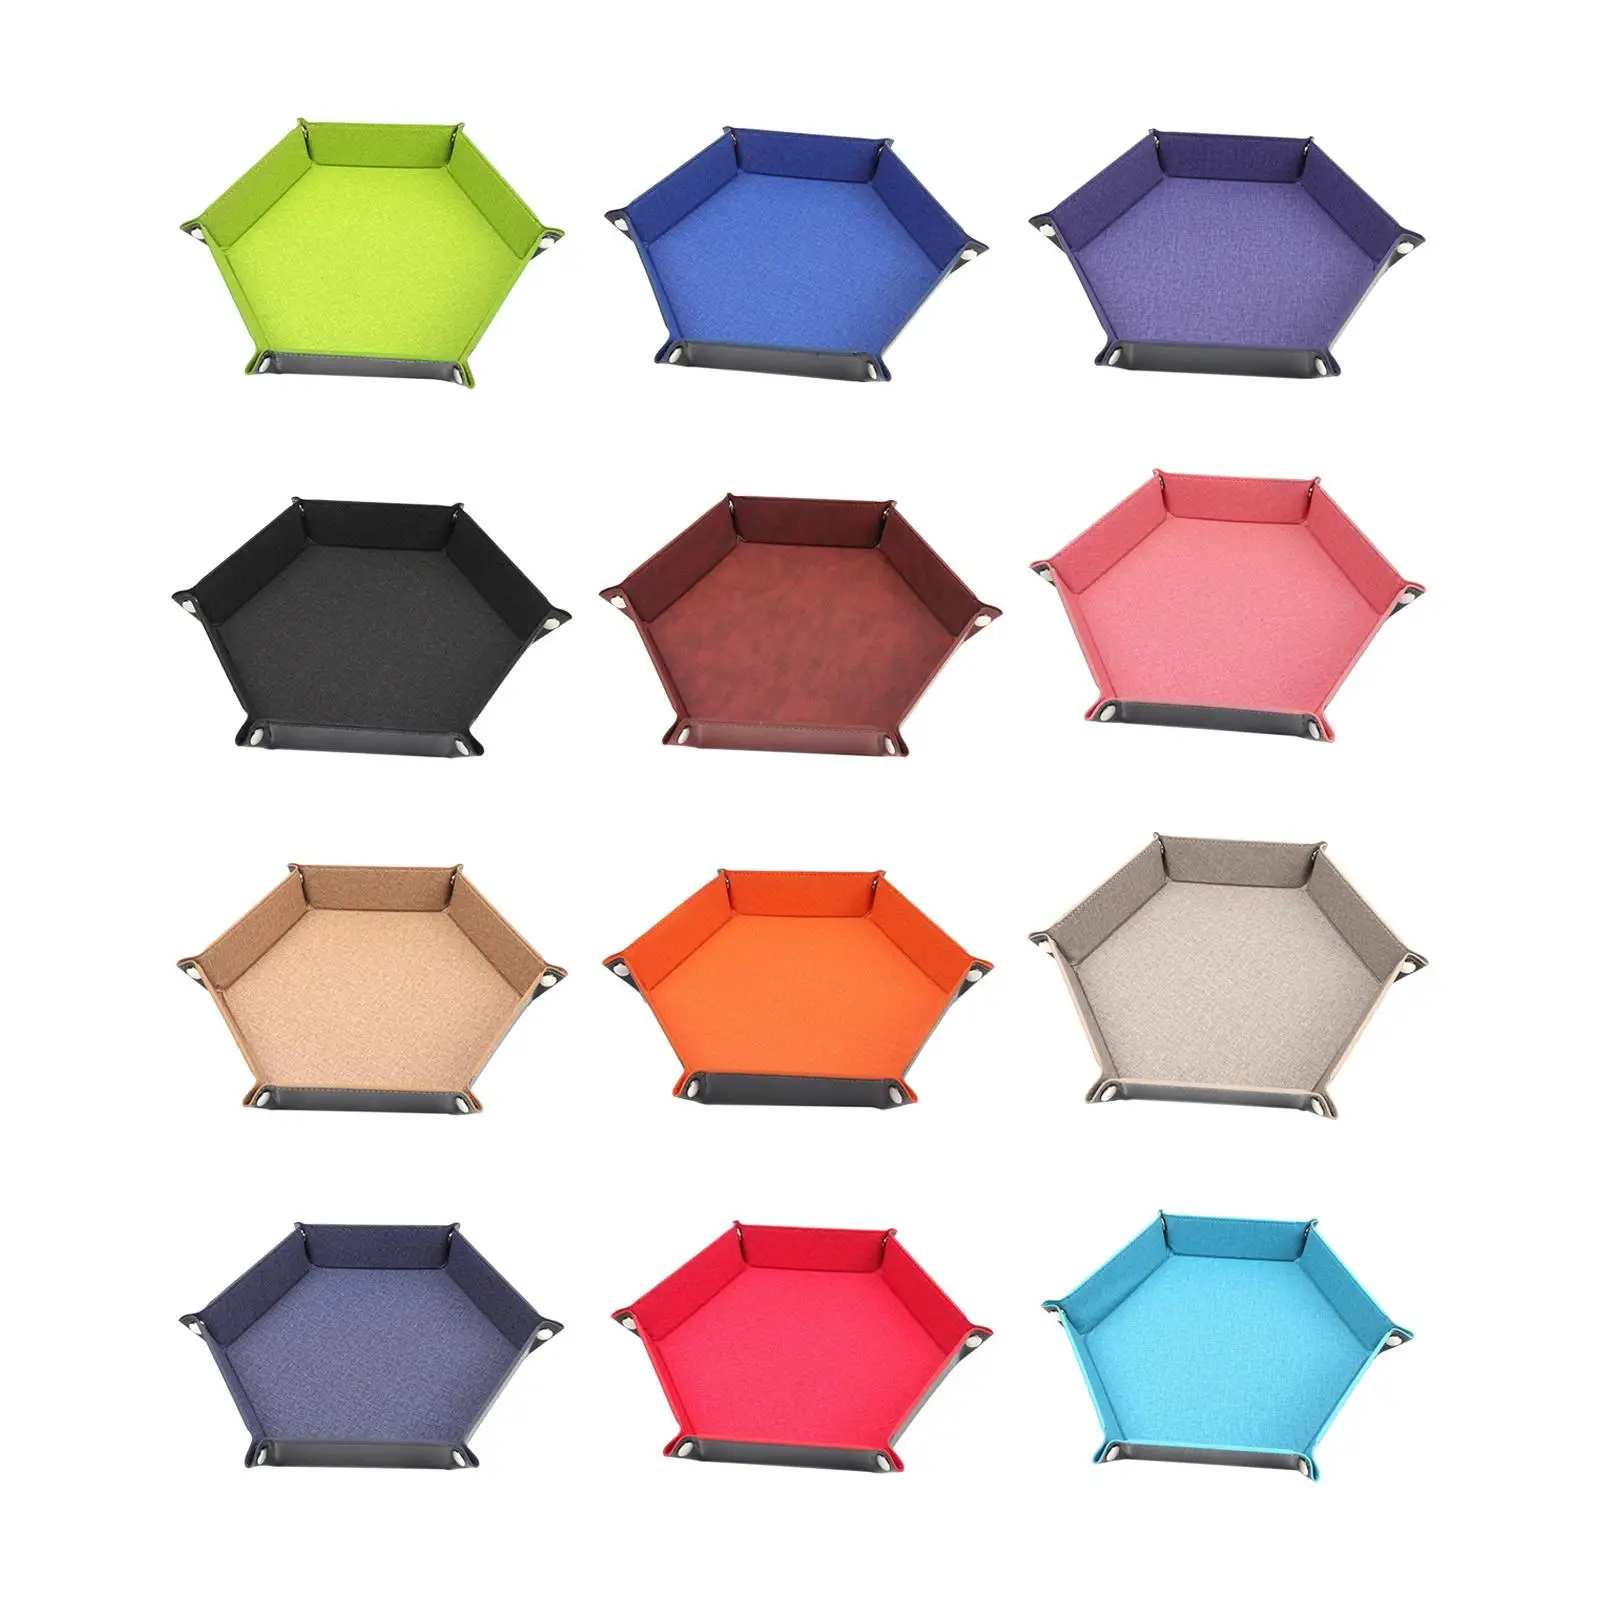 Hexagon Dice Tray Durable Multifunctional Wearable Holder Storage Box Folding Dice Rolling Tray for Earbuds Keys Stuff Sundries